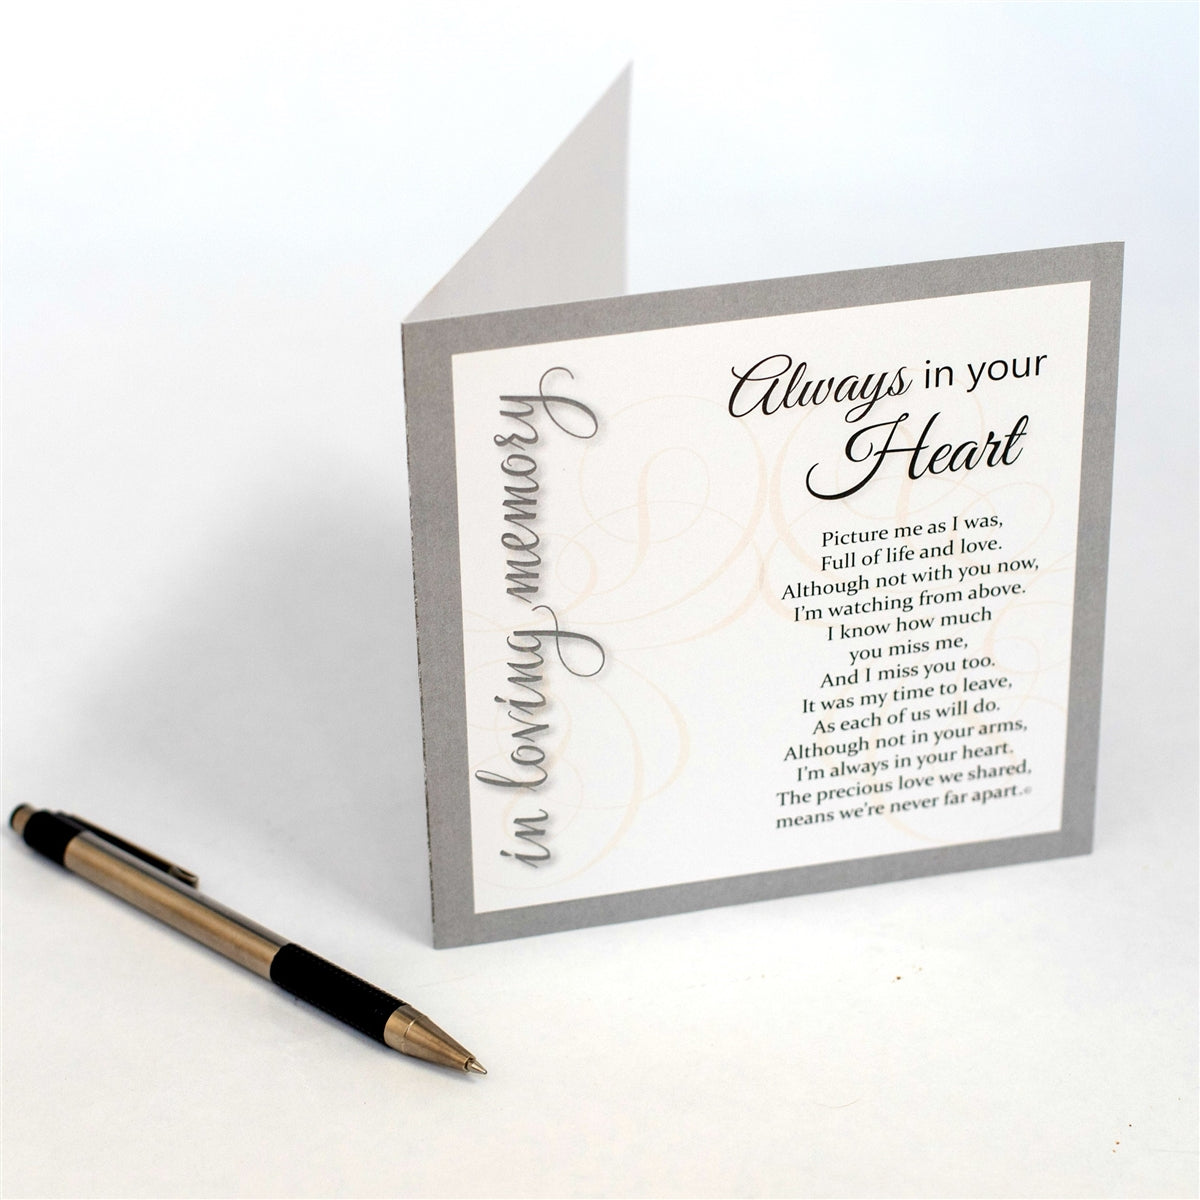 Always in Your Heart card standing open on a table showing the inside of the card where a sympathy note can be written by the giver